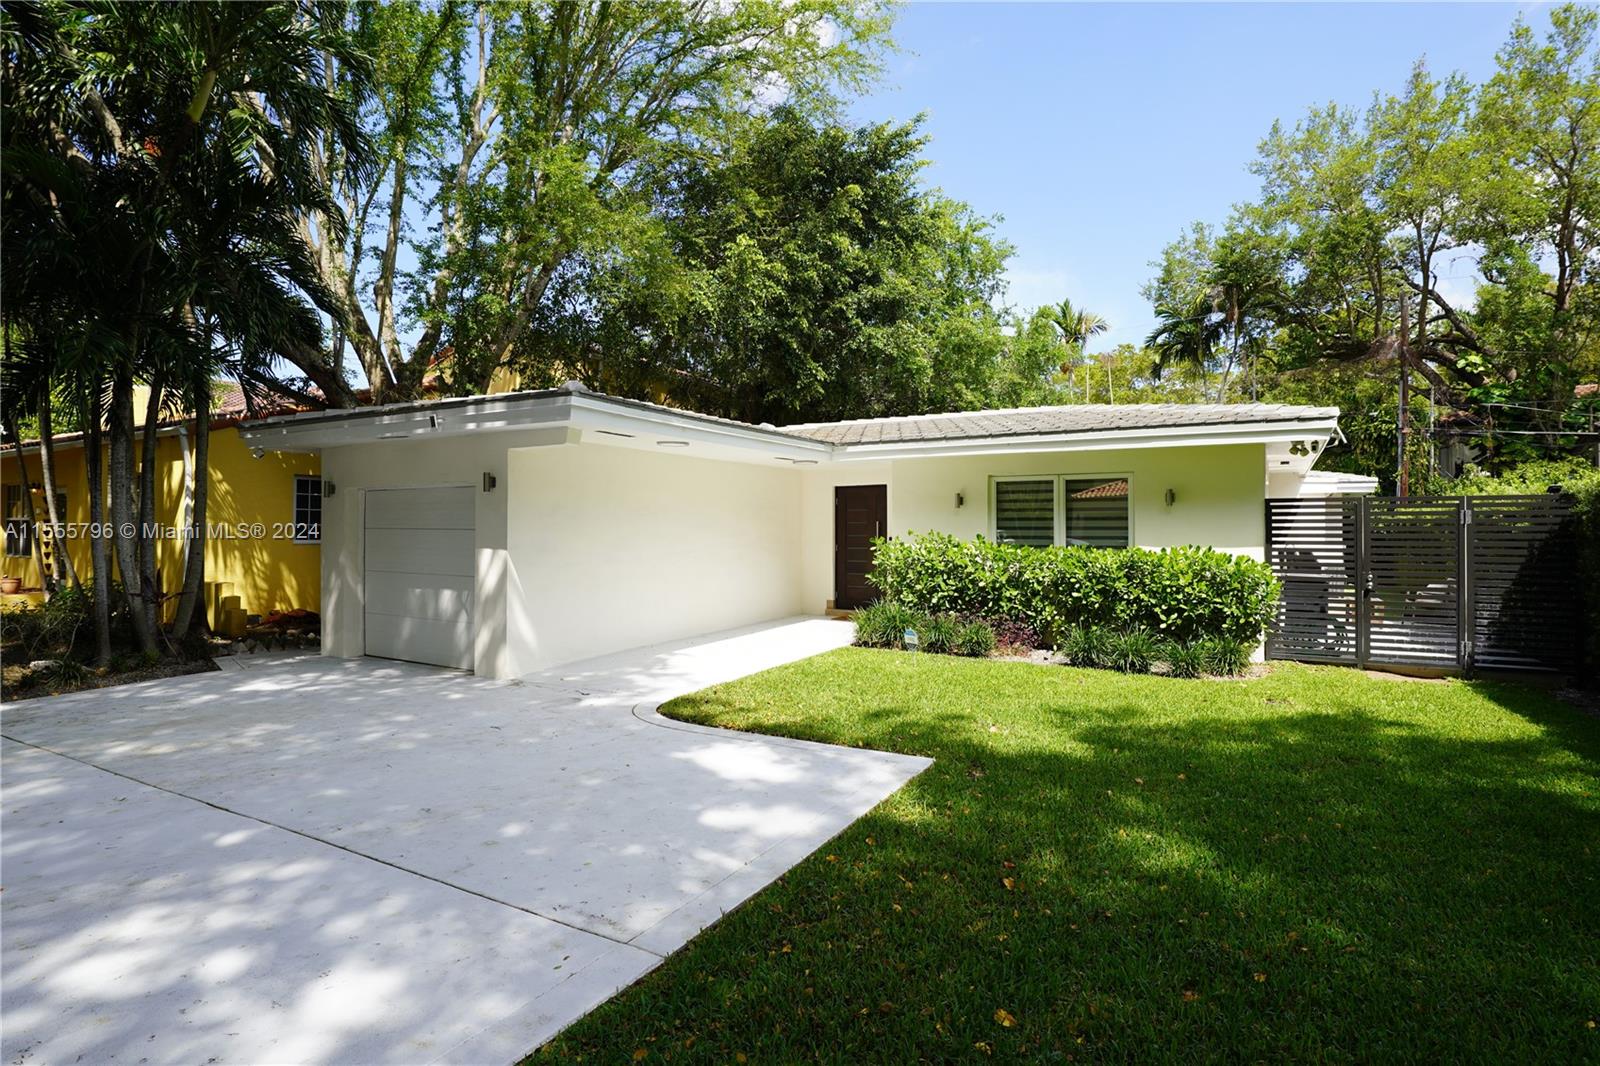 Live the Coral Gables lifestyle in this fully remodeled 3-bed, 2-bath Home with new roof replaced in January 2024 and Impact windows . From the inviting living spaces to the updated kitchen and bathrooms, every detail exudes quality and comfort. Step inside to discover a thoughtfully designed Home with an emphasis on both style and functionality. The open-concept layout creates a seamless flow from the living room to the dining area and kitchen, ideal for both everyday living and entertaining guests. Retreat to the master suite. Two additional bedrooms provide plenty of room for family, guests, or a home office. Outside, you'll find a beautifully landscaped backyard, perfect for hosting a BBQ with friends or simply relaxing, this outdoor space will become your favorite spot to unwind.